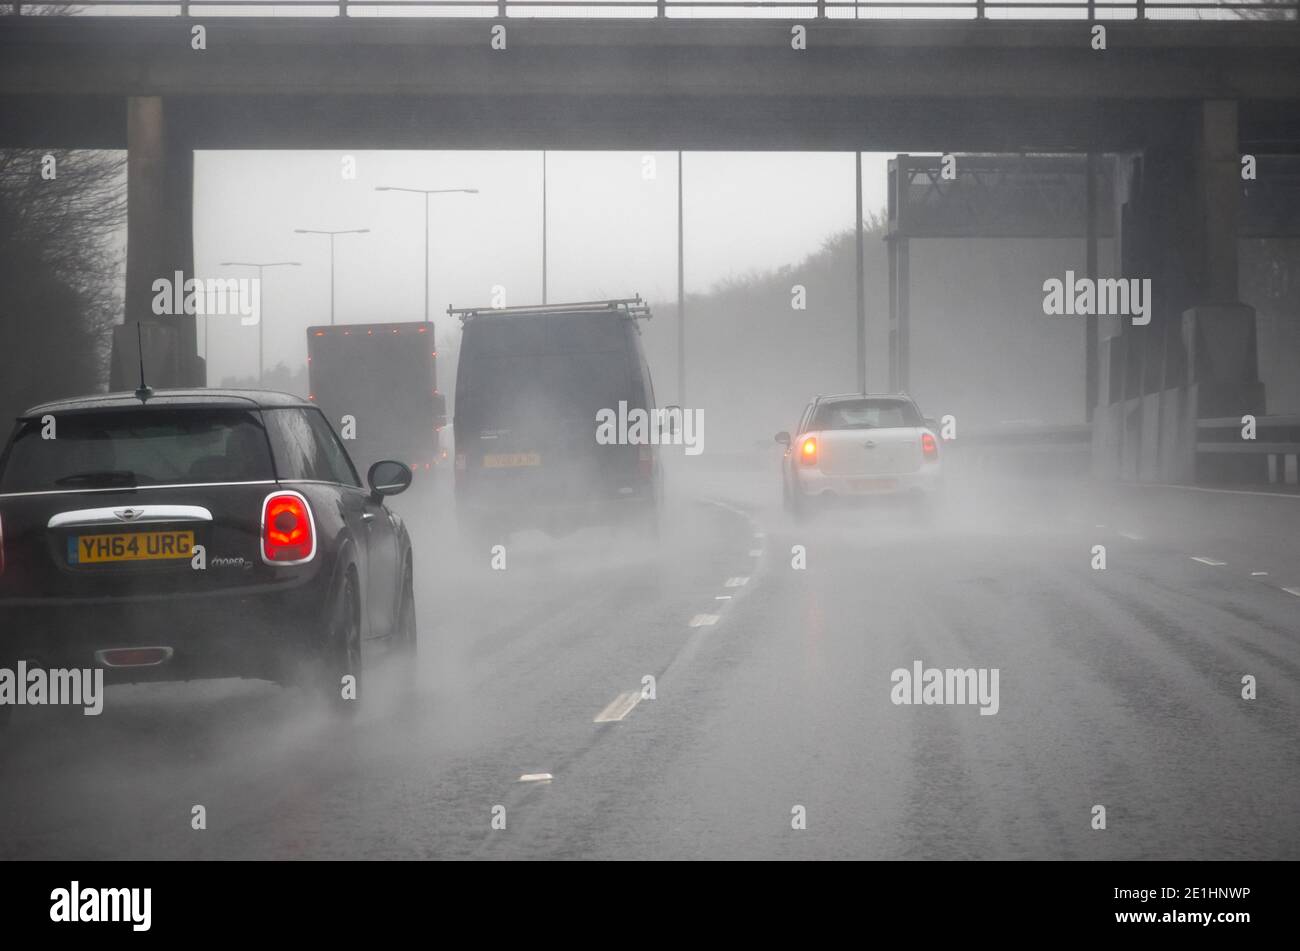 London, UK - April 9, 2019 - Rain on the road, adverse, foggy and rainy driving conditions on the motorway Stock Photo